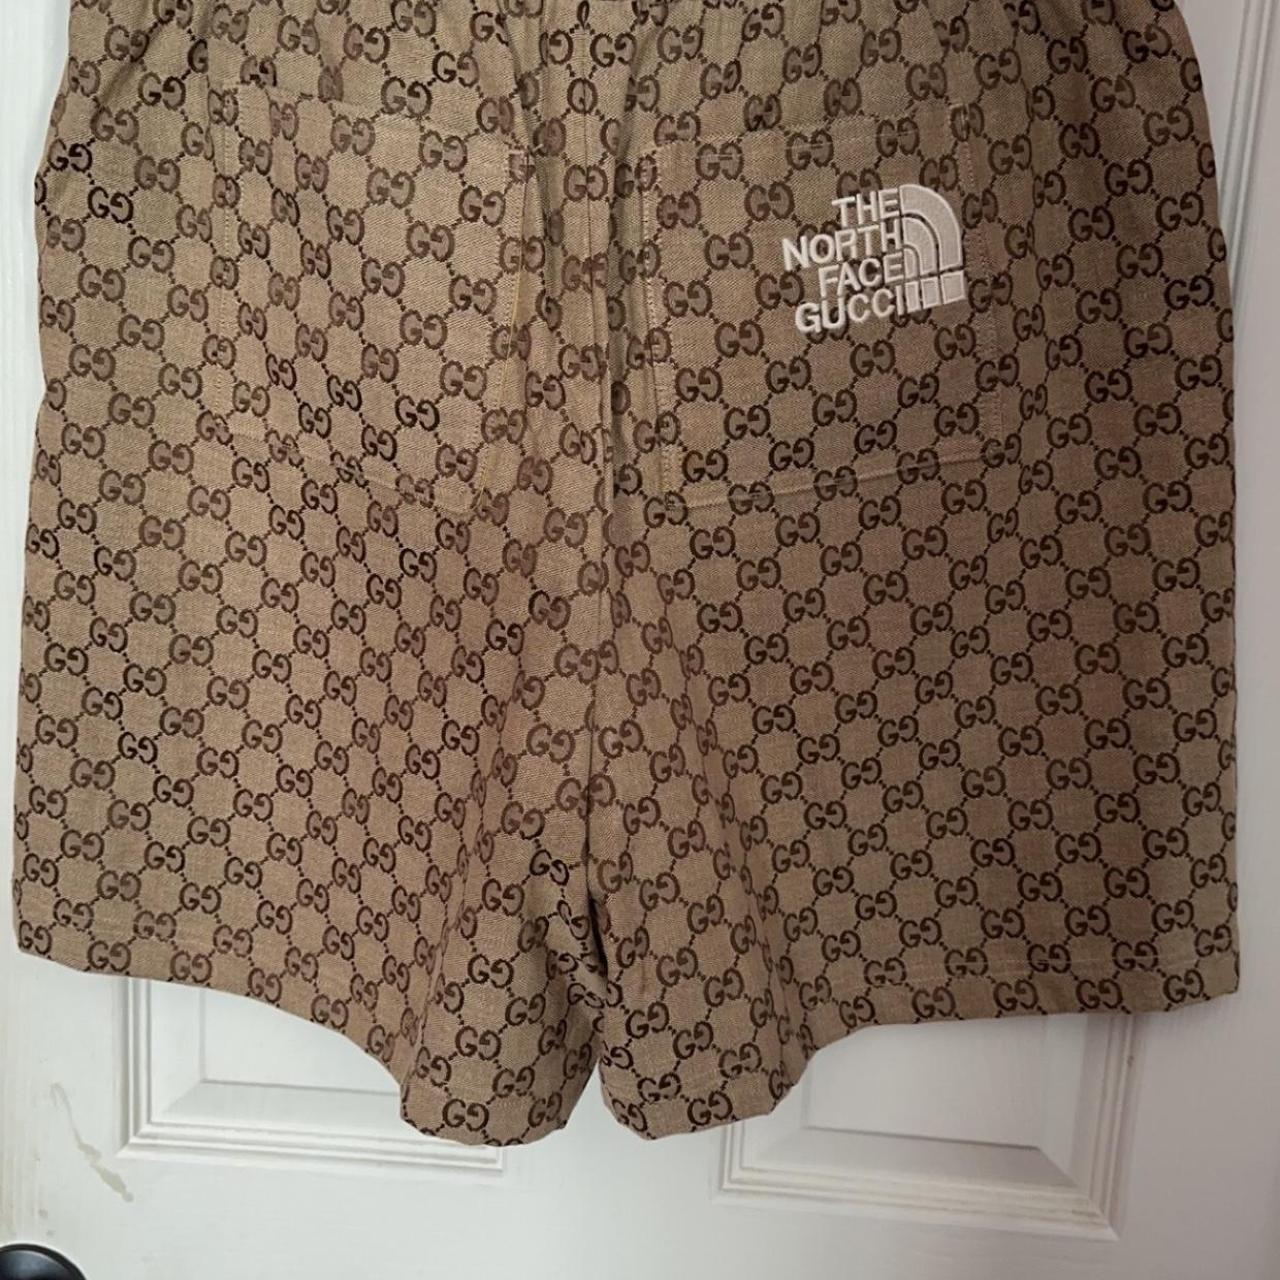 Buy The North Face x Gucci GG Canvas Shorts 'Beige/Ebony' - 644586